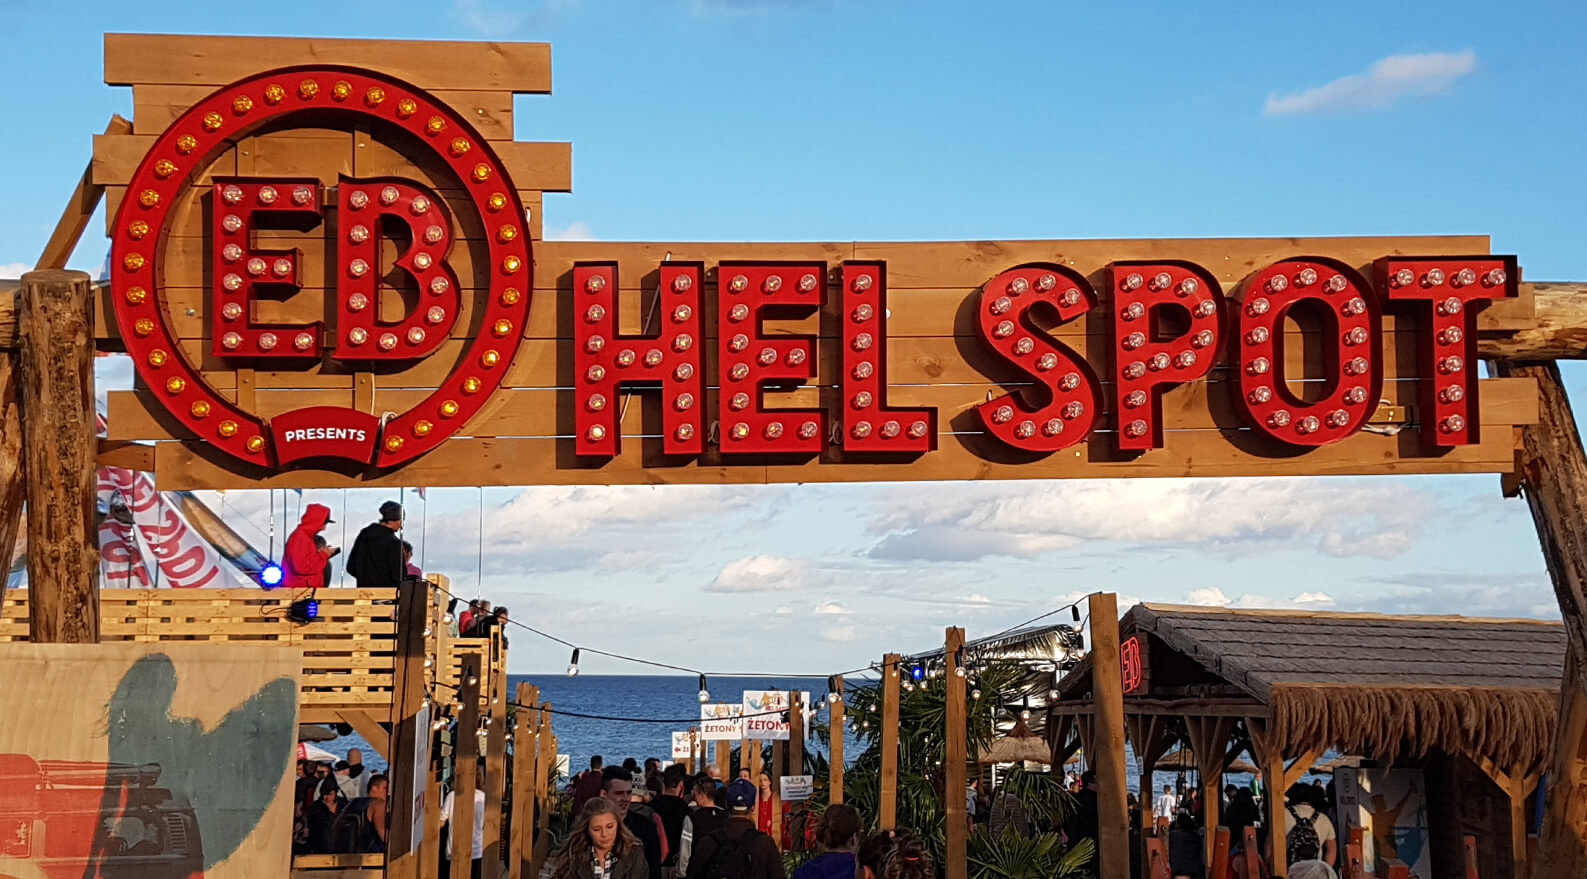 EB hell spot - EB Hel Spot Festival - logo and letters with bulbs placed on a wooden frame over the entrance